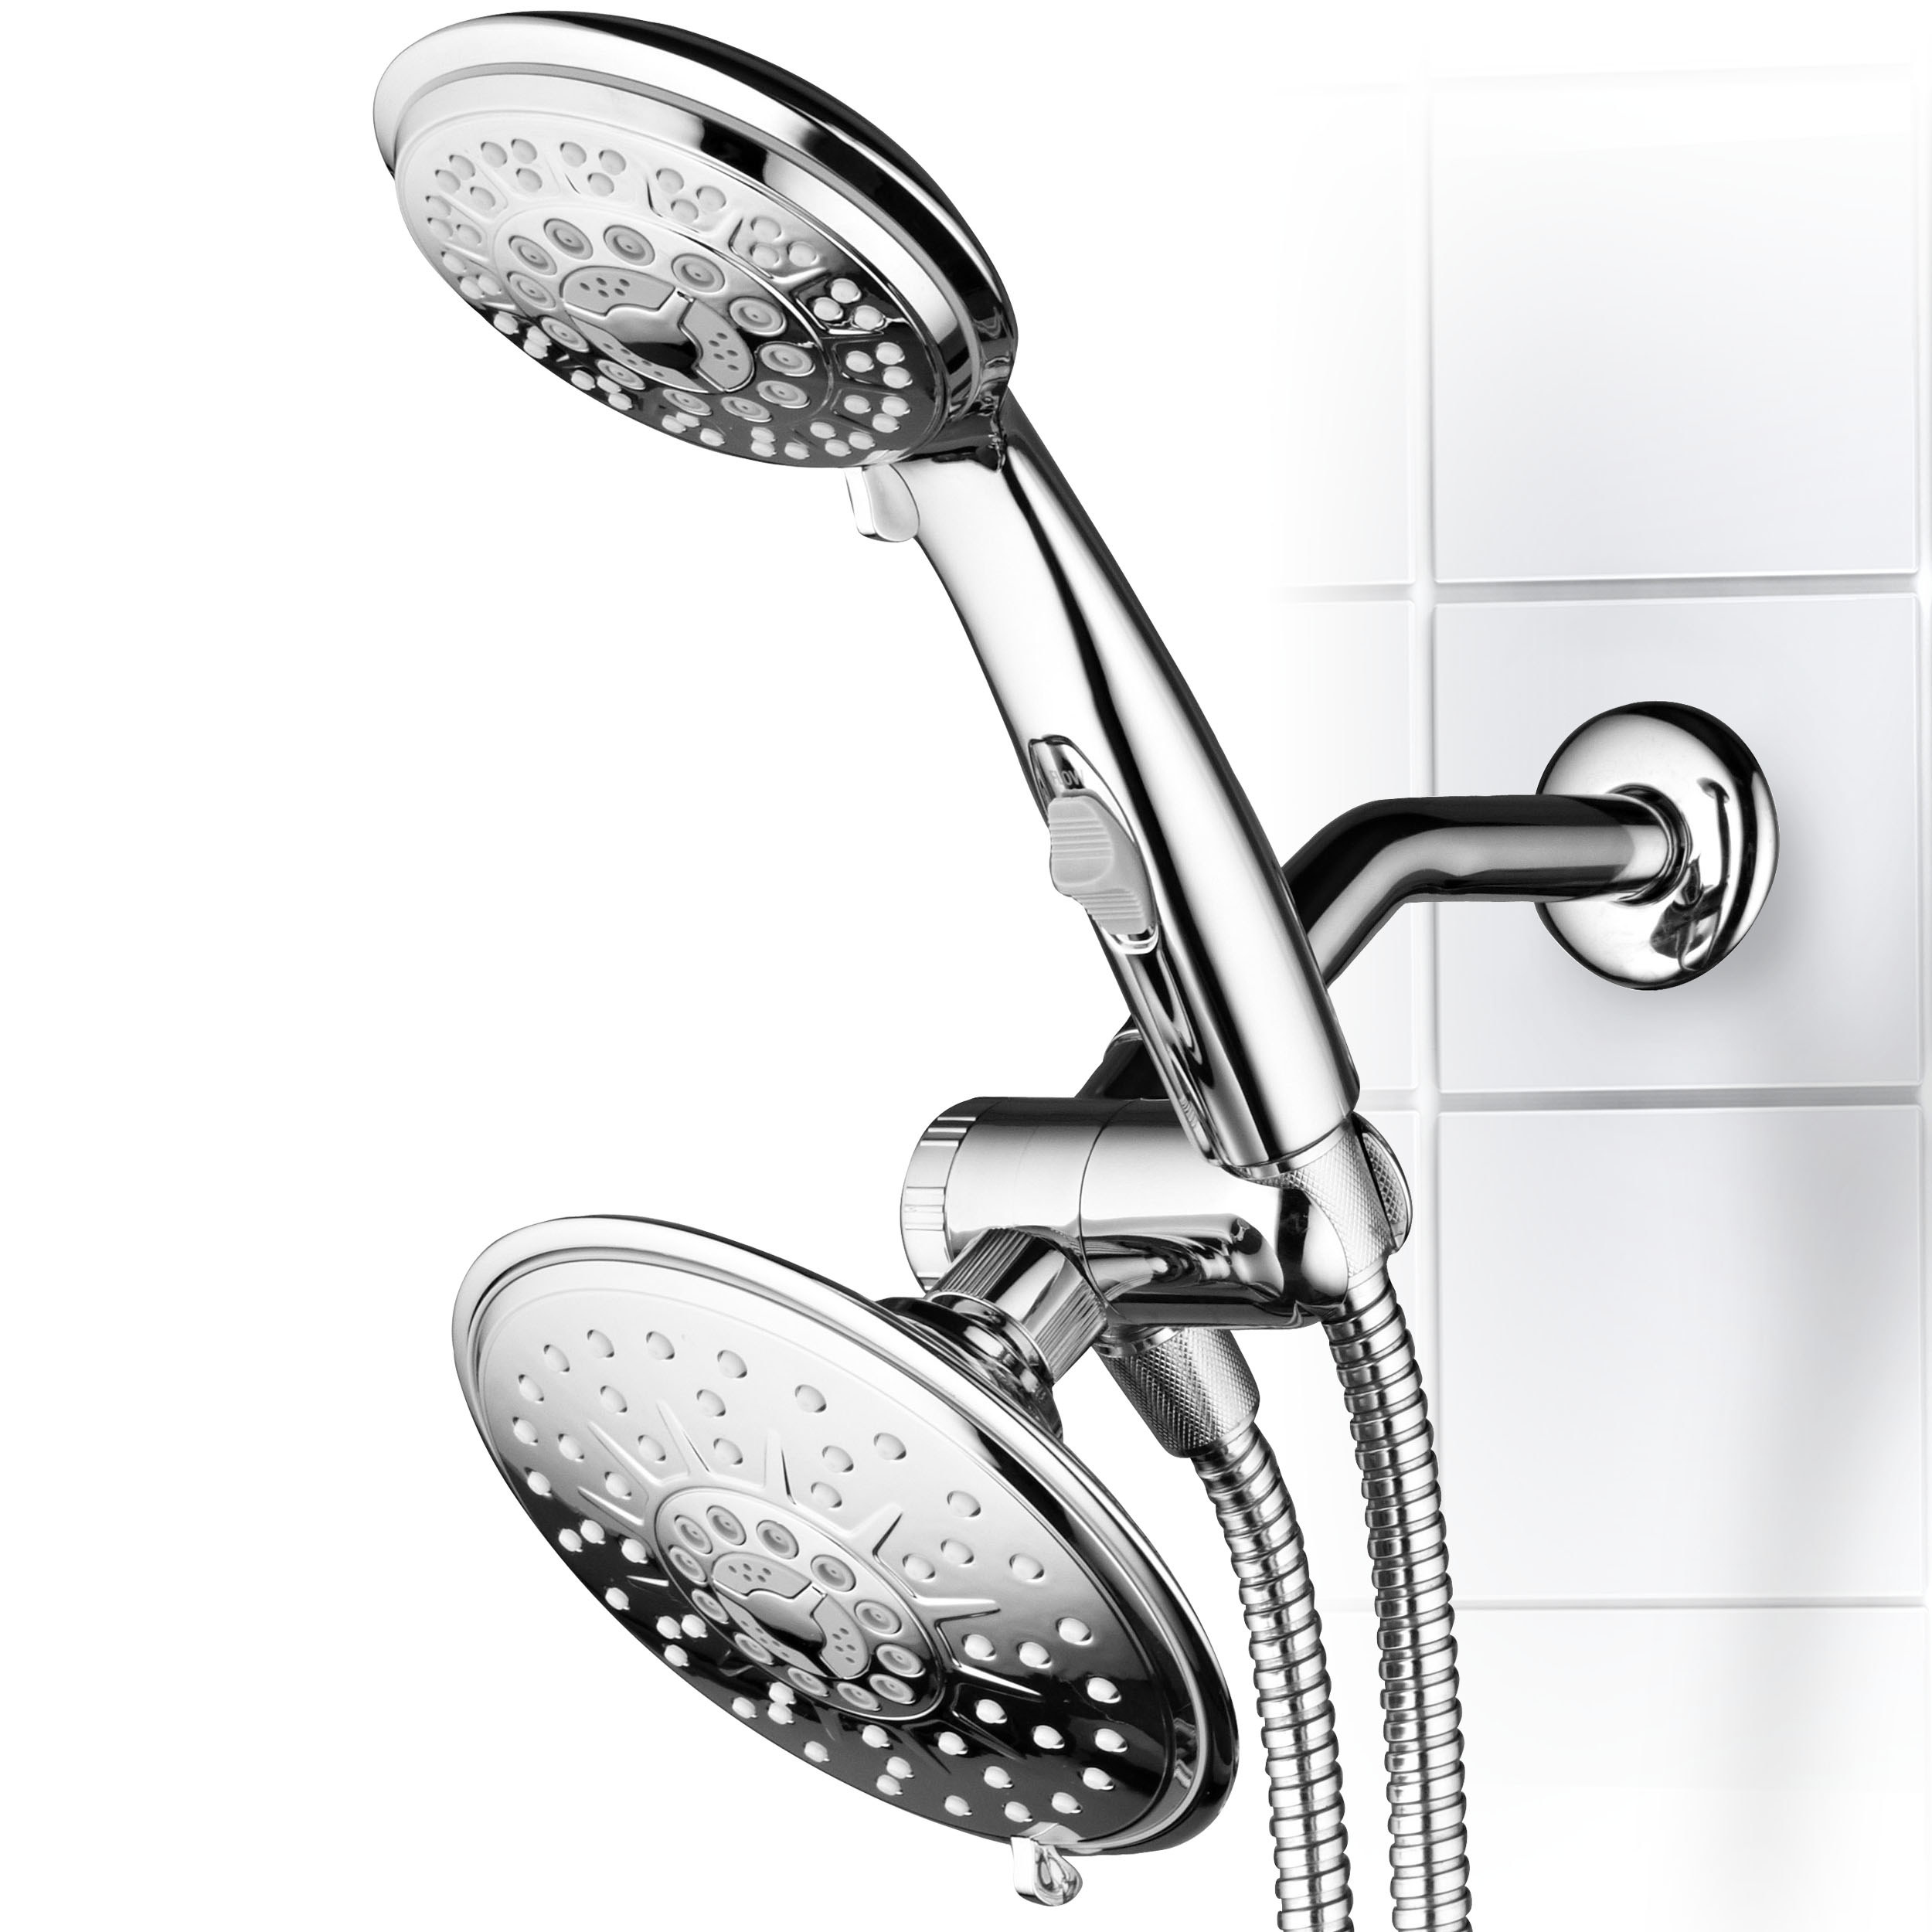 A shower head with 30 settings